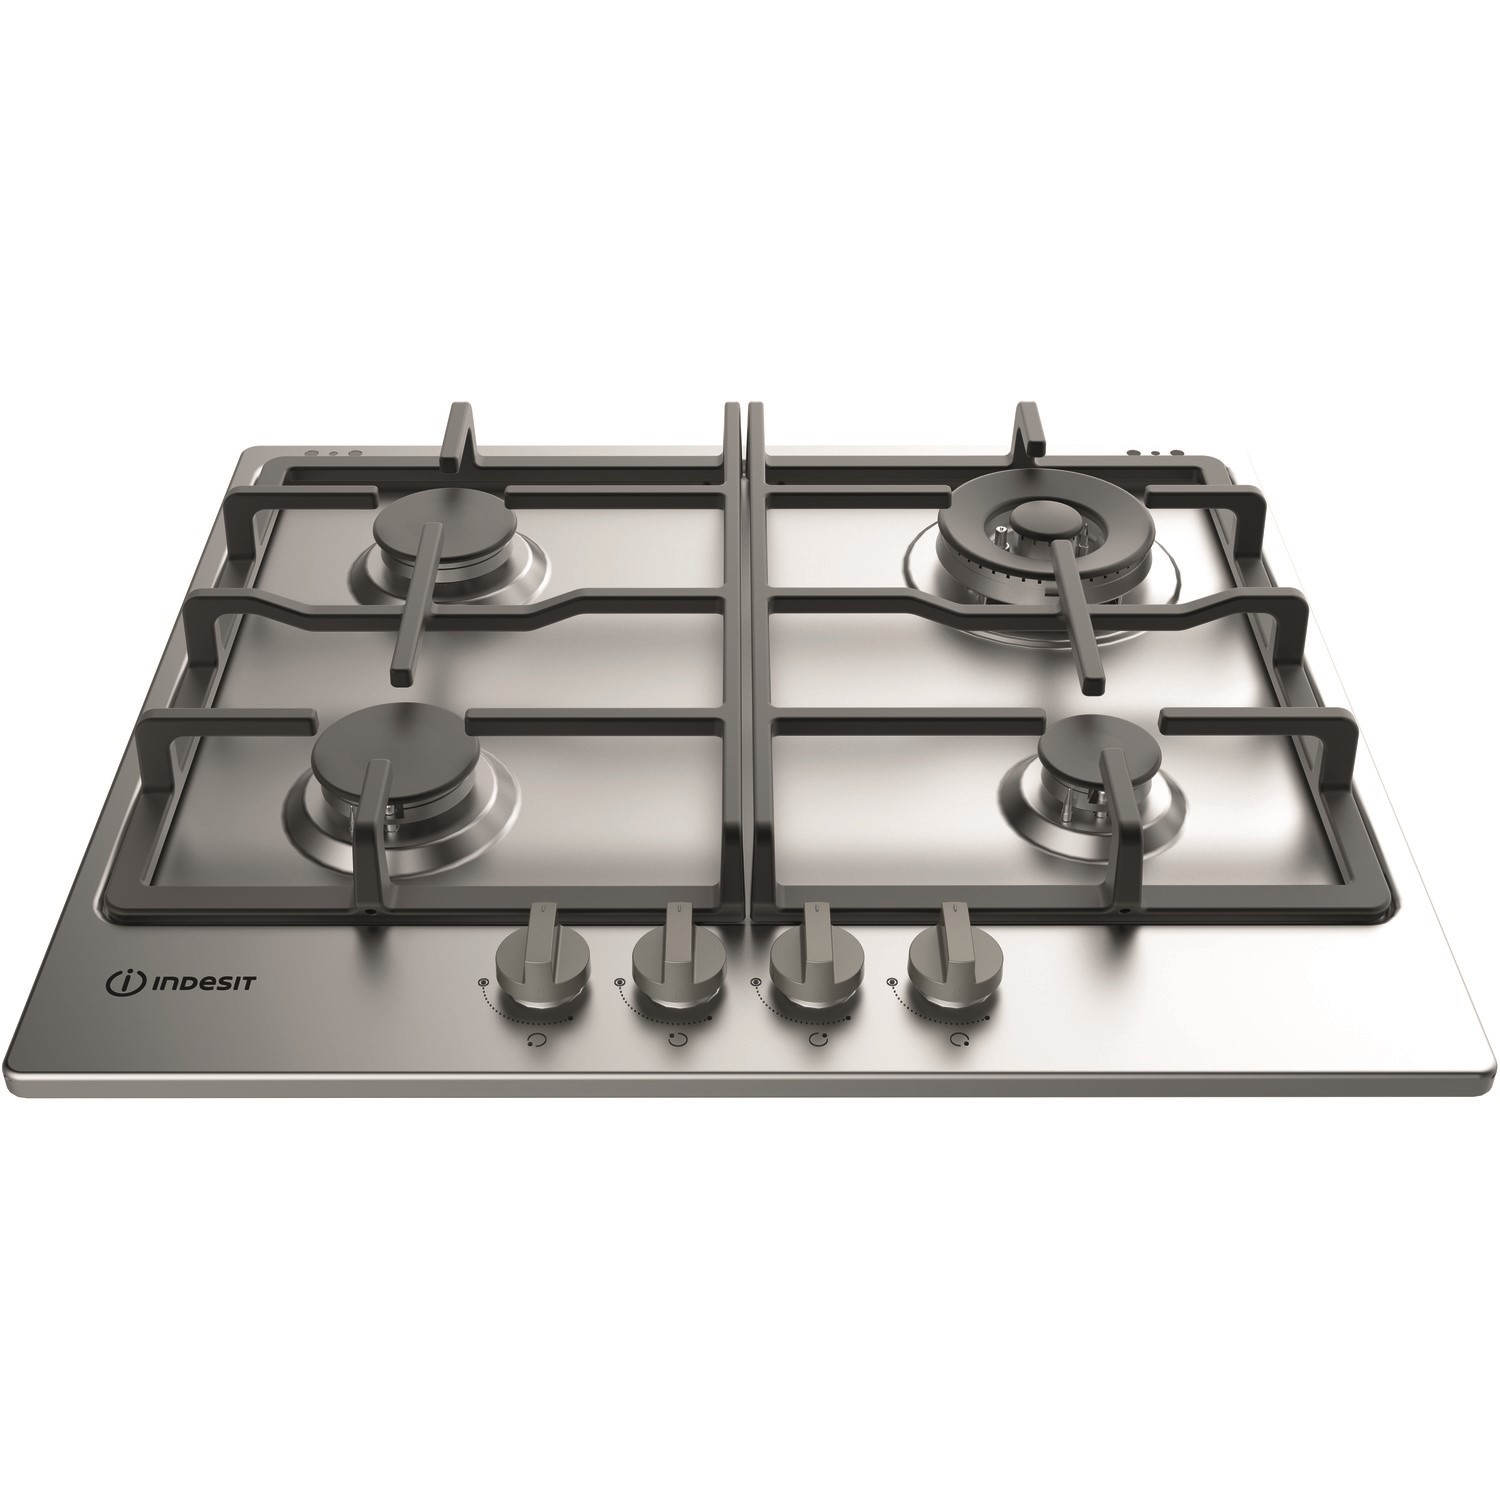 Refurbished Indesit THP641WIXI 59cm Four Burner Gas Hob With Cast Iron Pan Stands - Stainless Steel